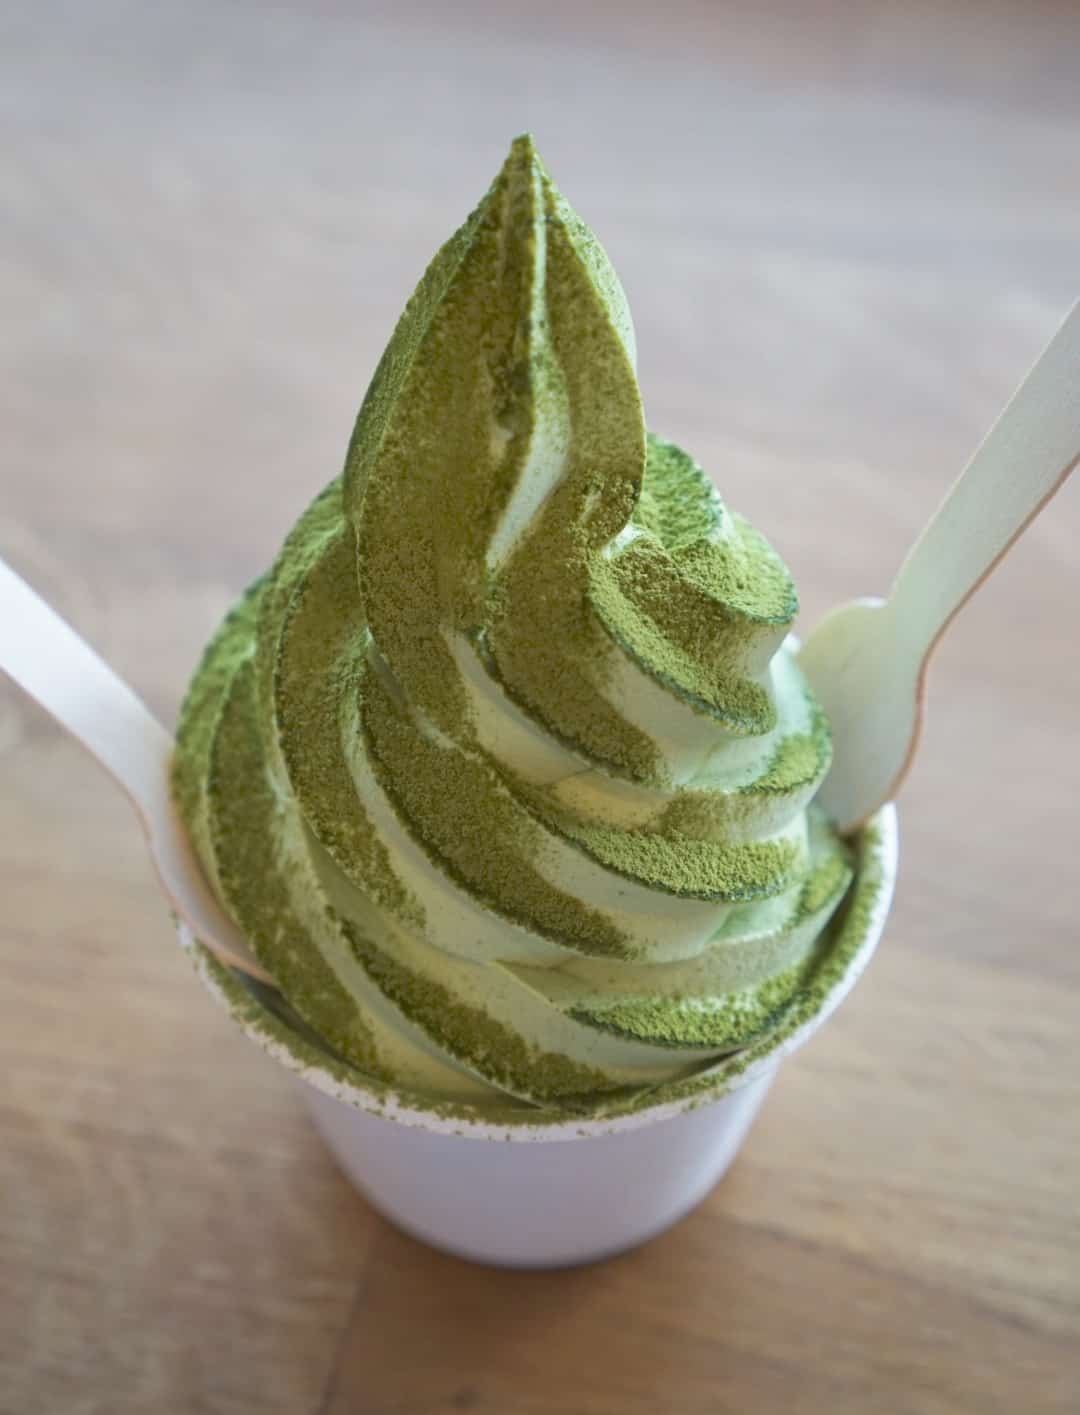 Top 5 Matcha Ice Cream Shops In Los Angeles